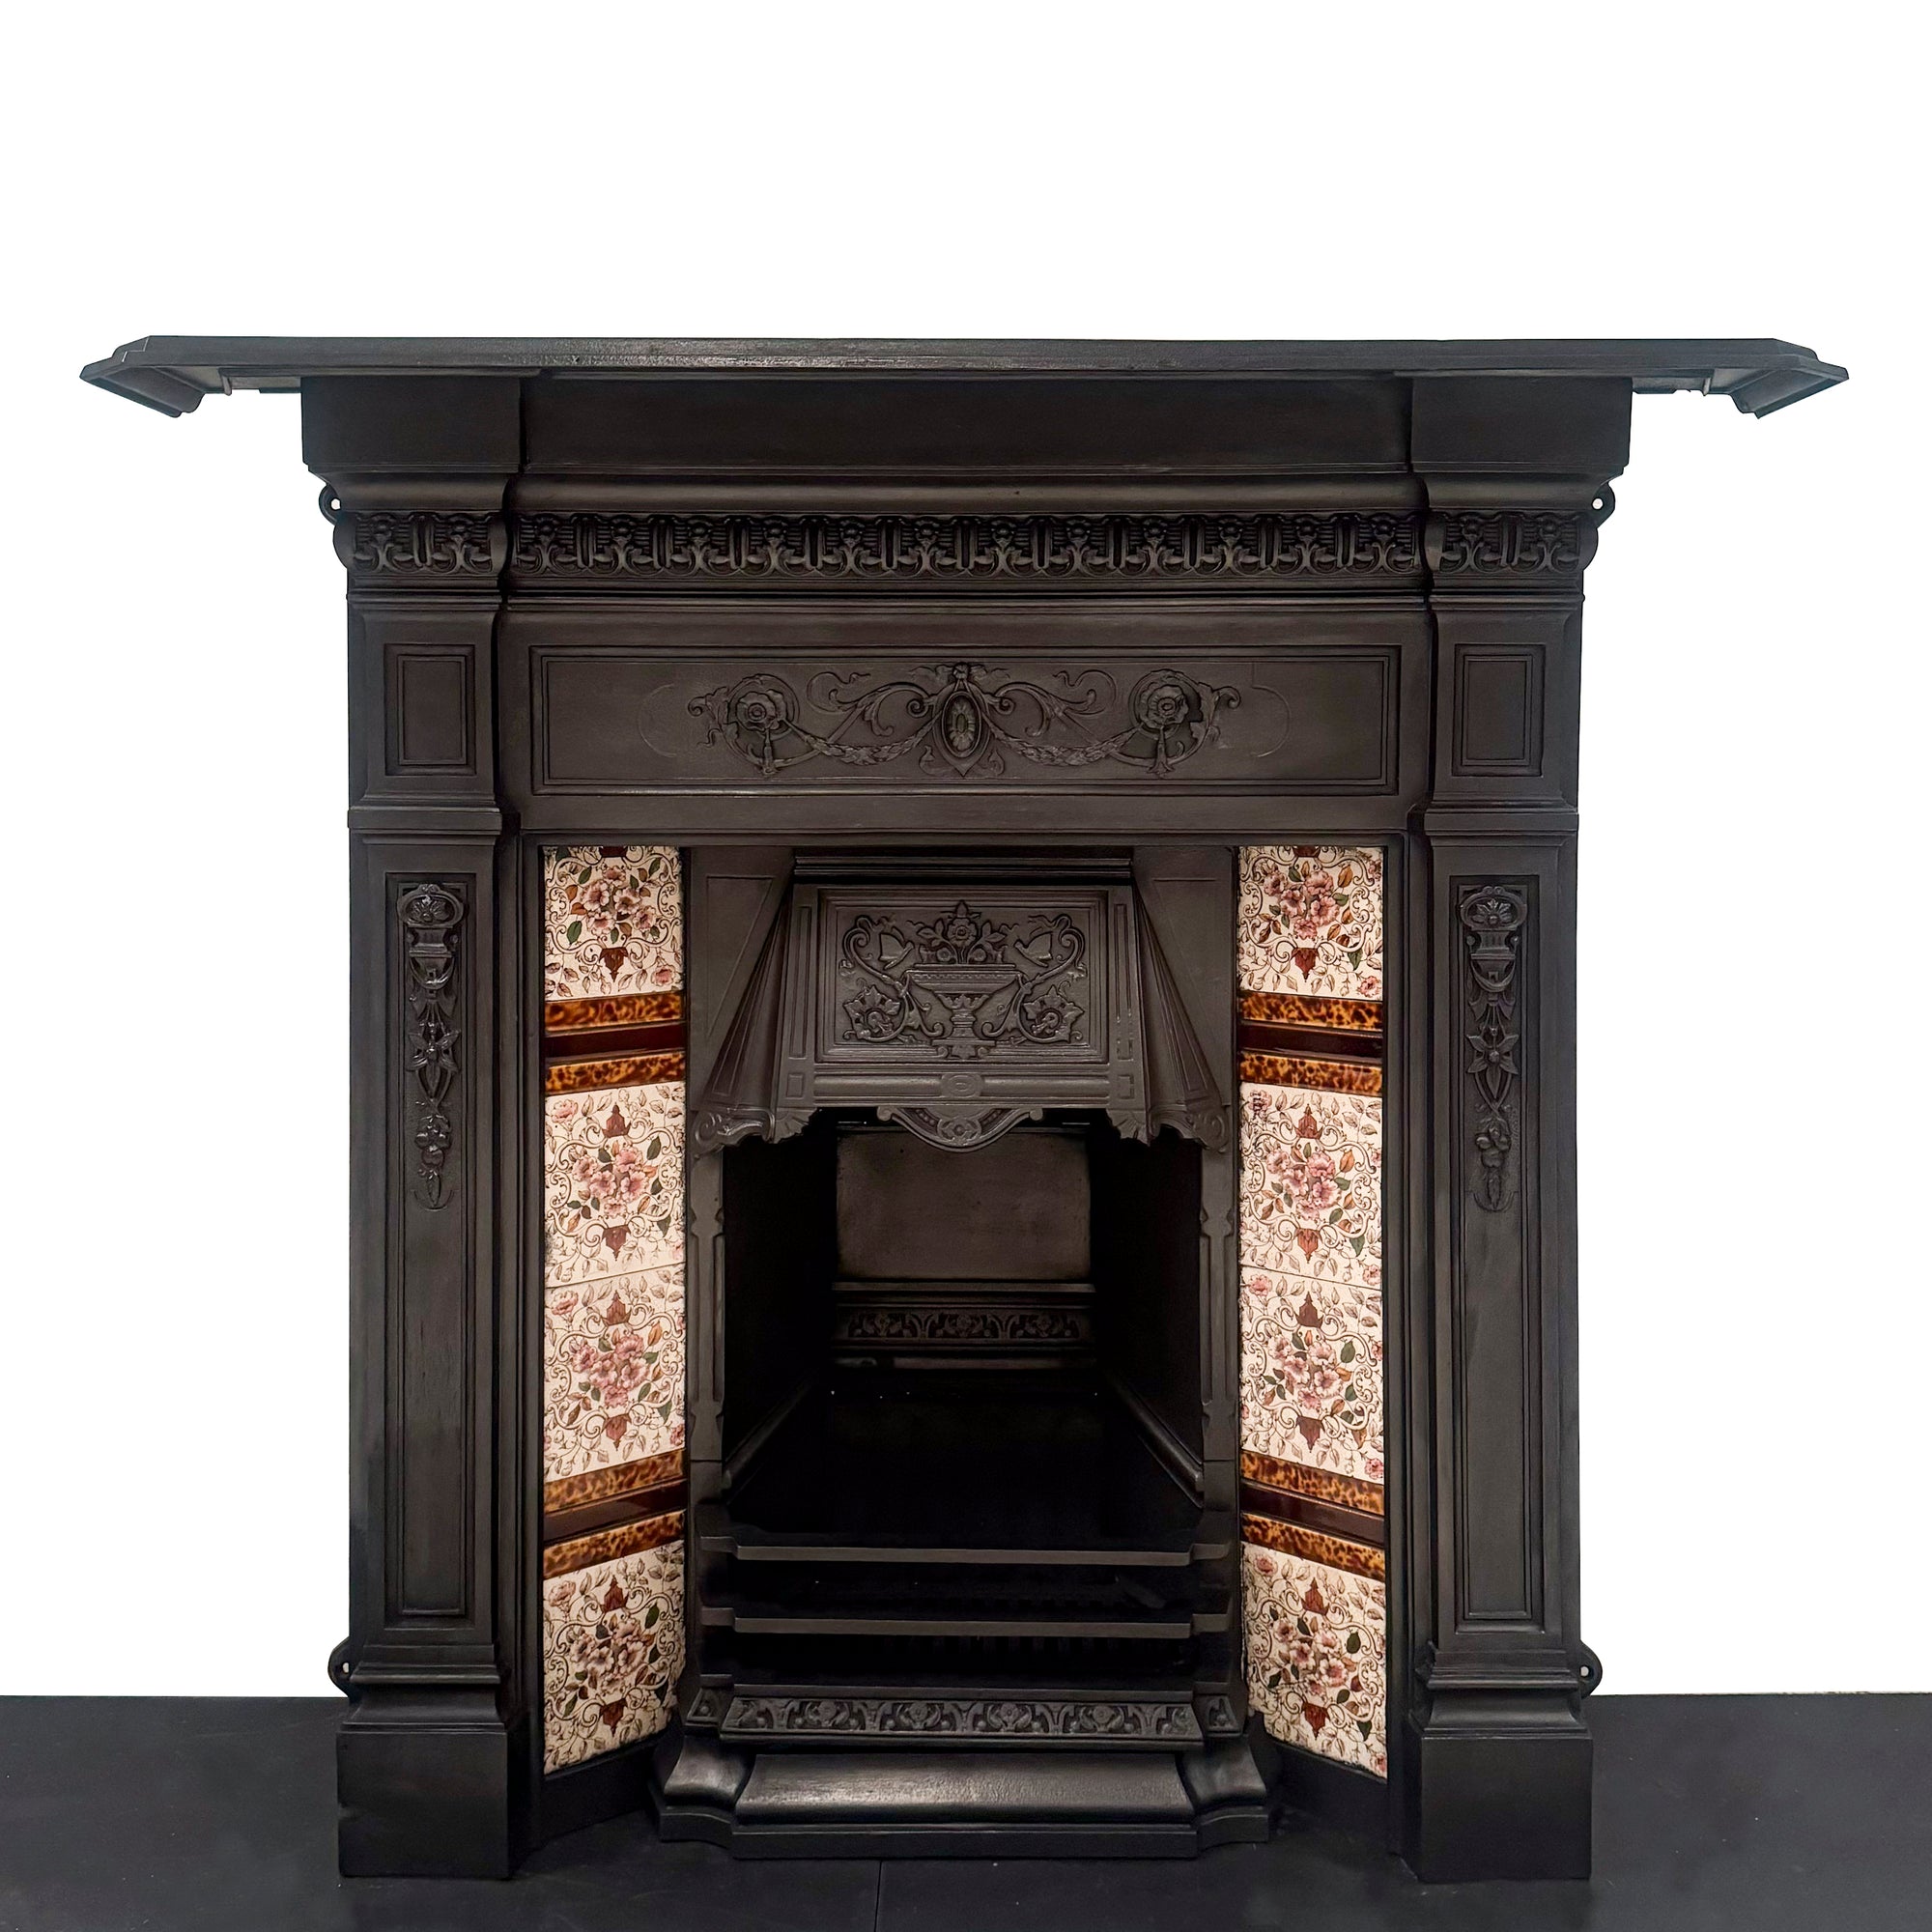 Antique Victorian Cast Iron Tiled Combination Fireplace | The Architectural Forum